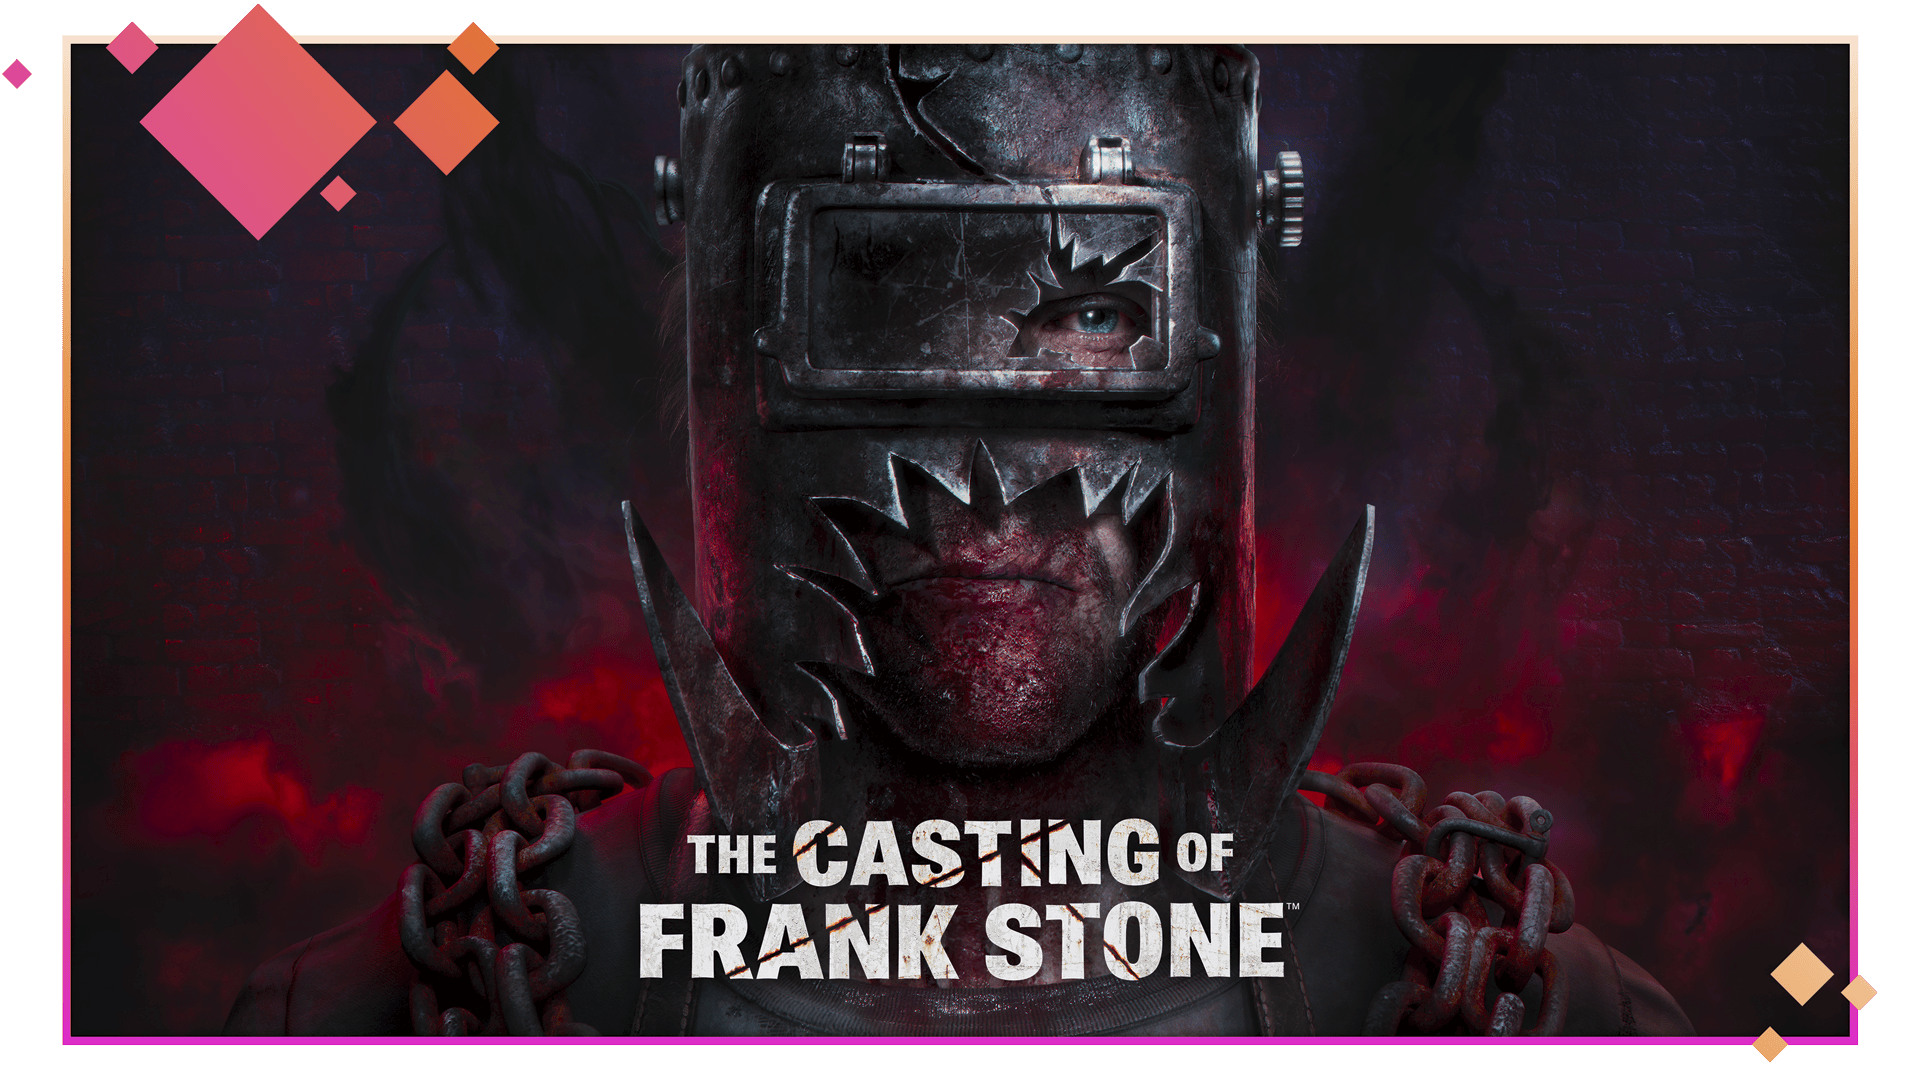 The Casting of Frank Stone - Reveal Trailer | PS5 Games